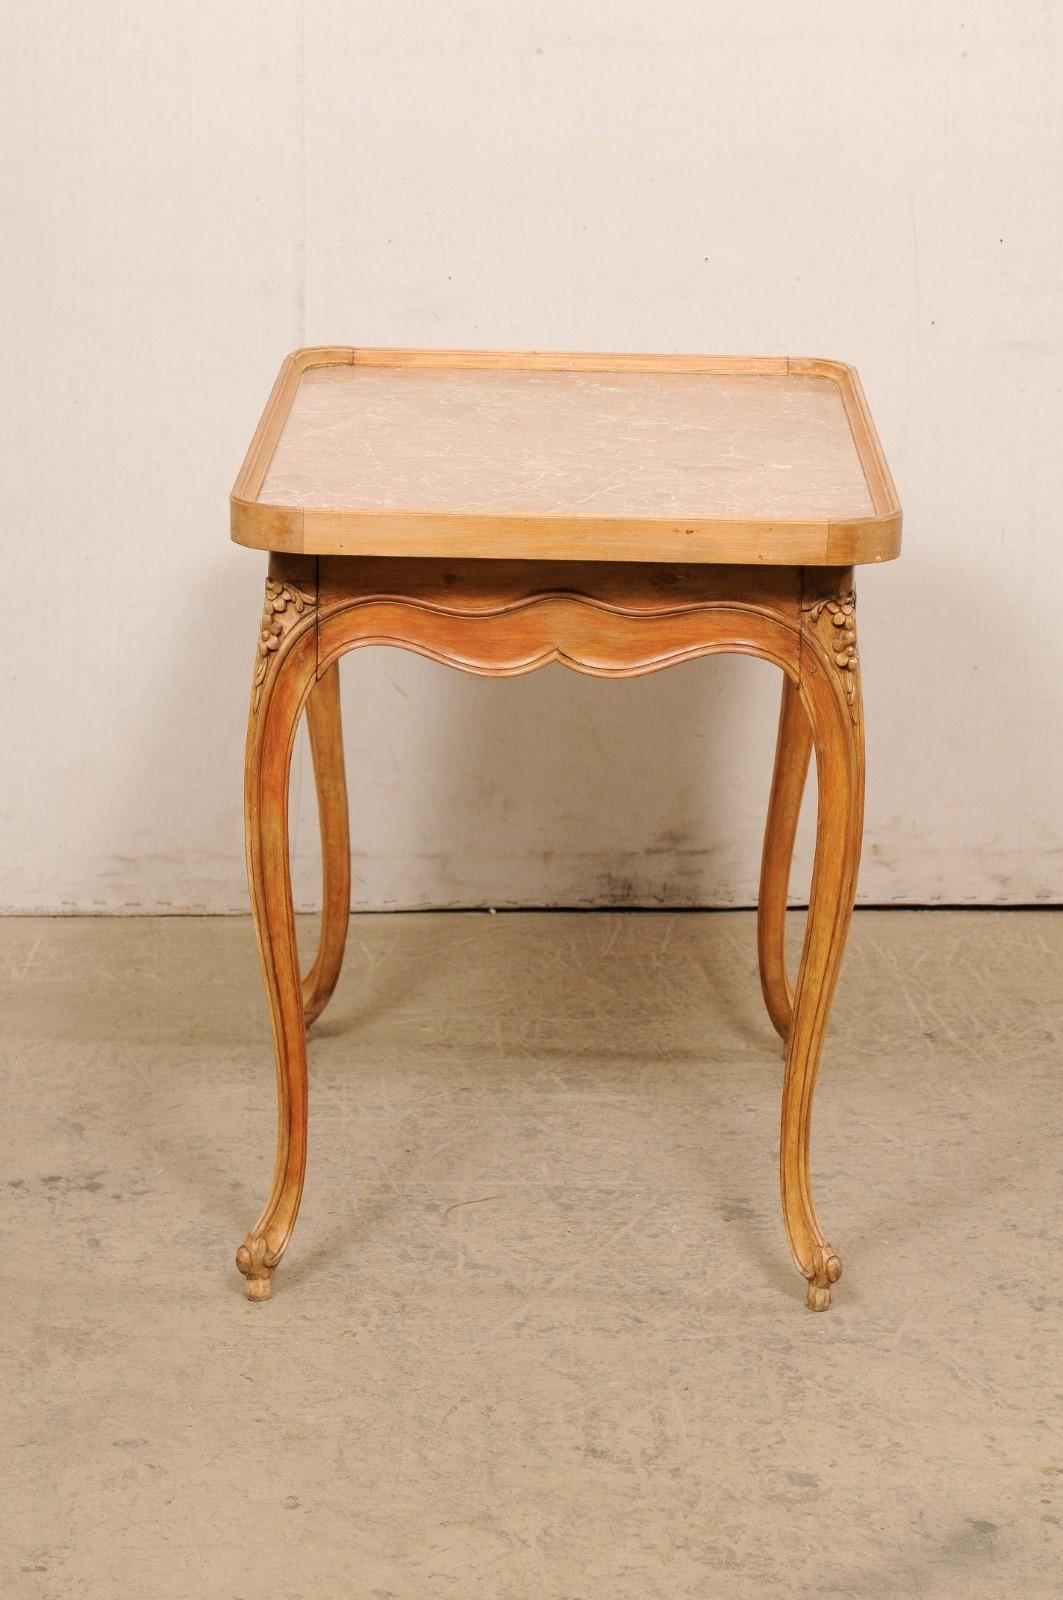 Late 18th Century French Marble-Top Carved-Wood Occasional Table with Drawer For Sale 7